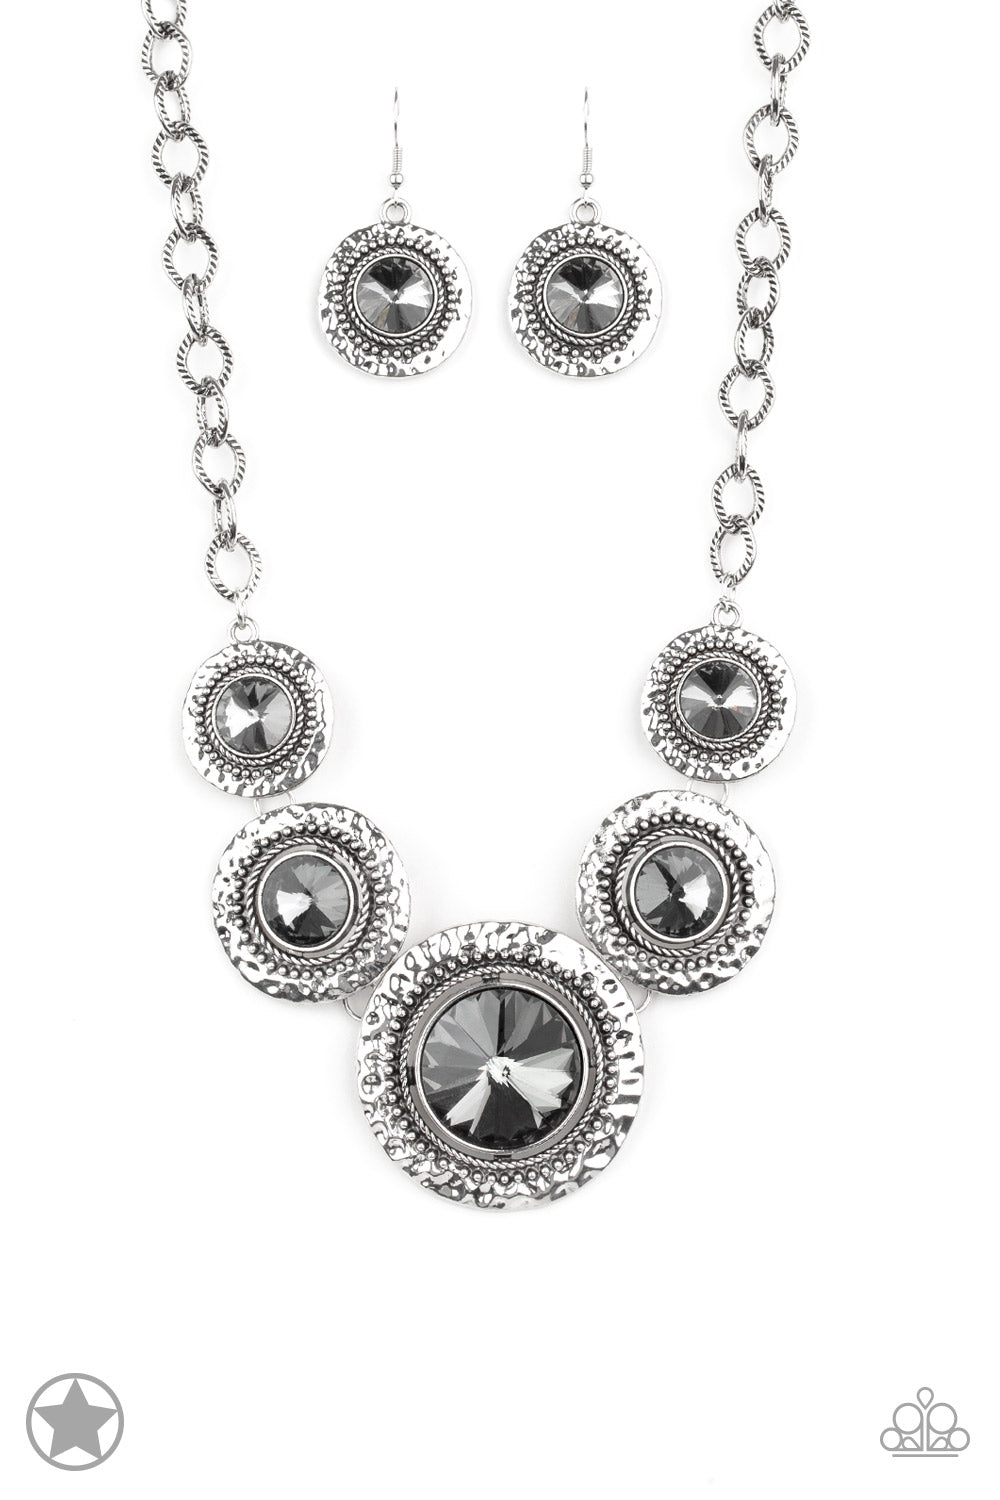 Global Glamour Paparazzi Necklaces Cashmere Pink Jewels